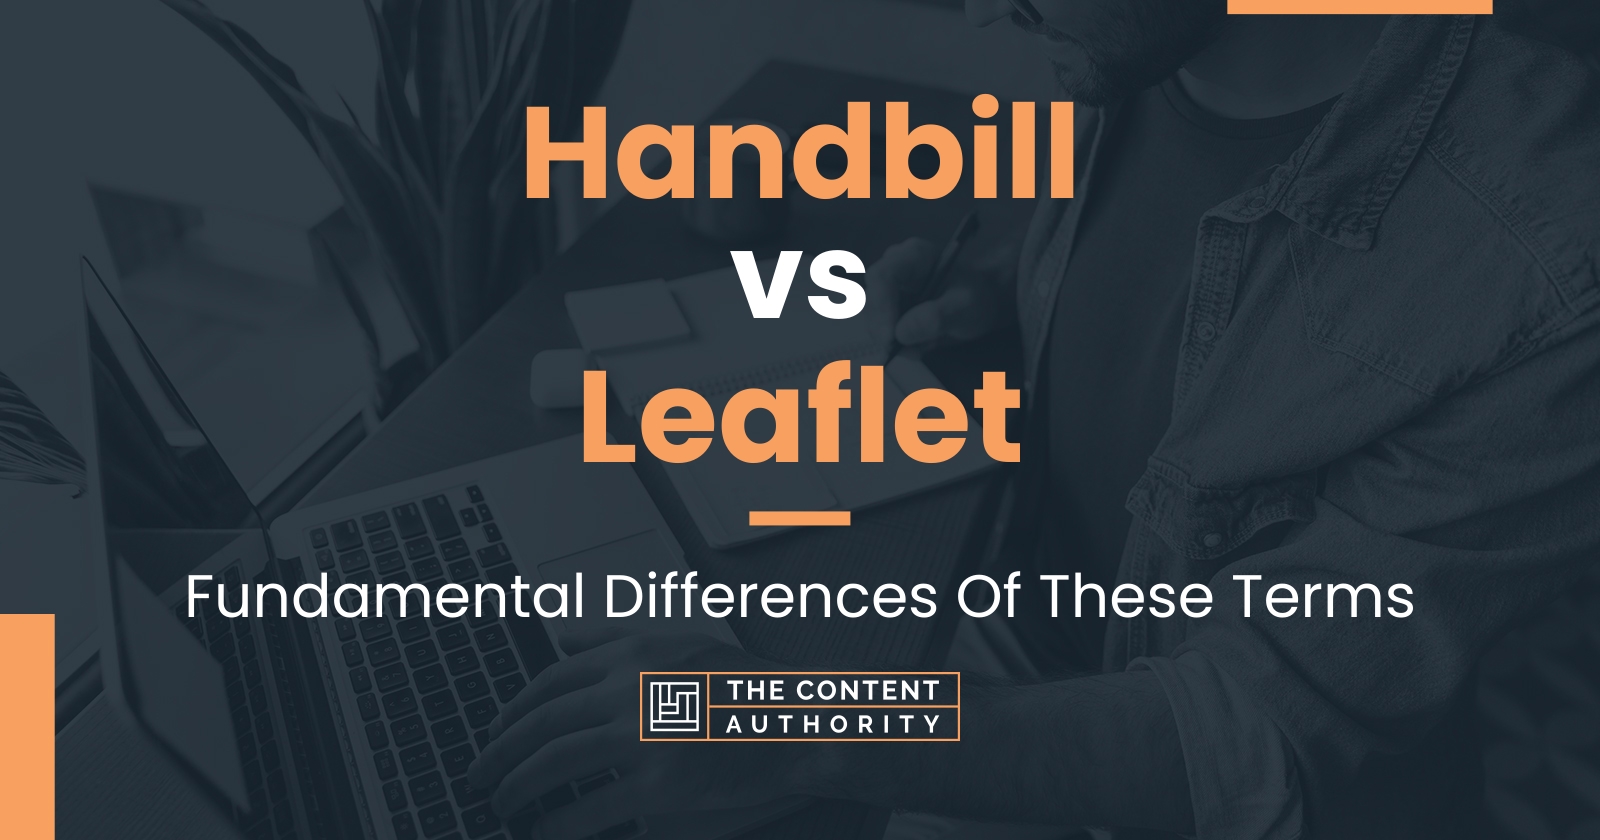 Handbill vs Leaflet: Fundamental Differences Of These Terms